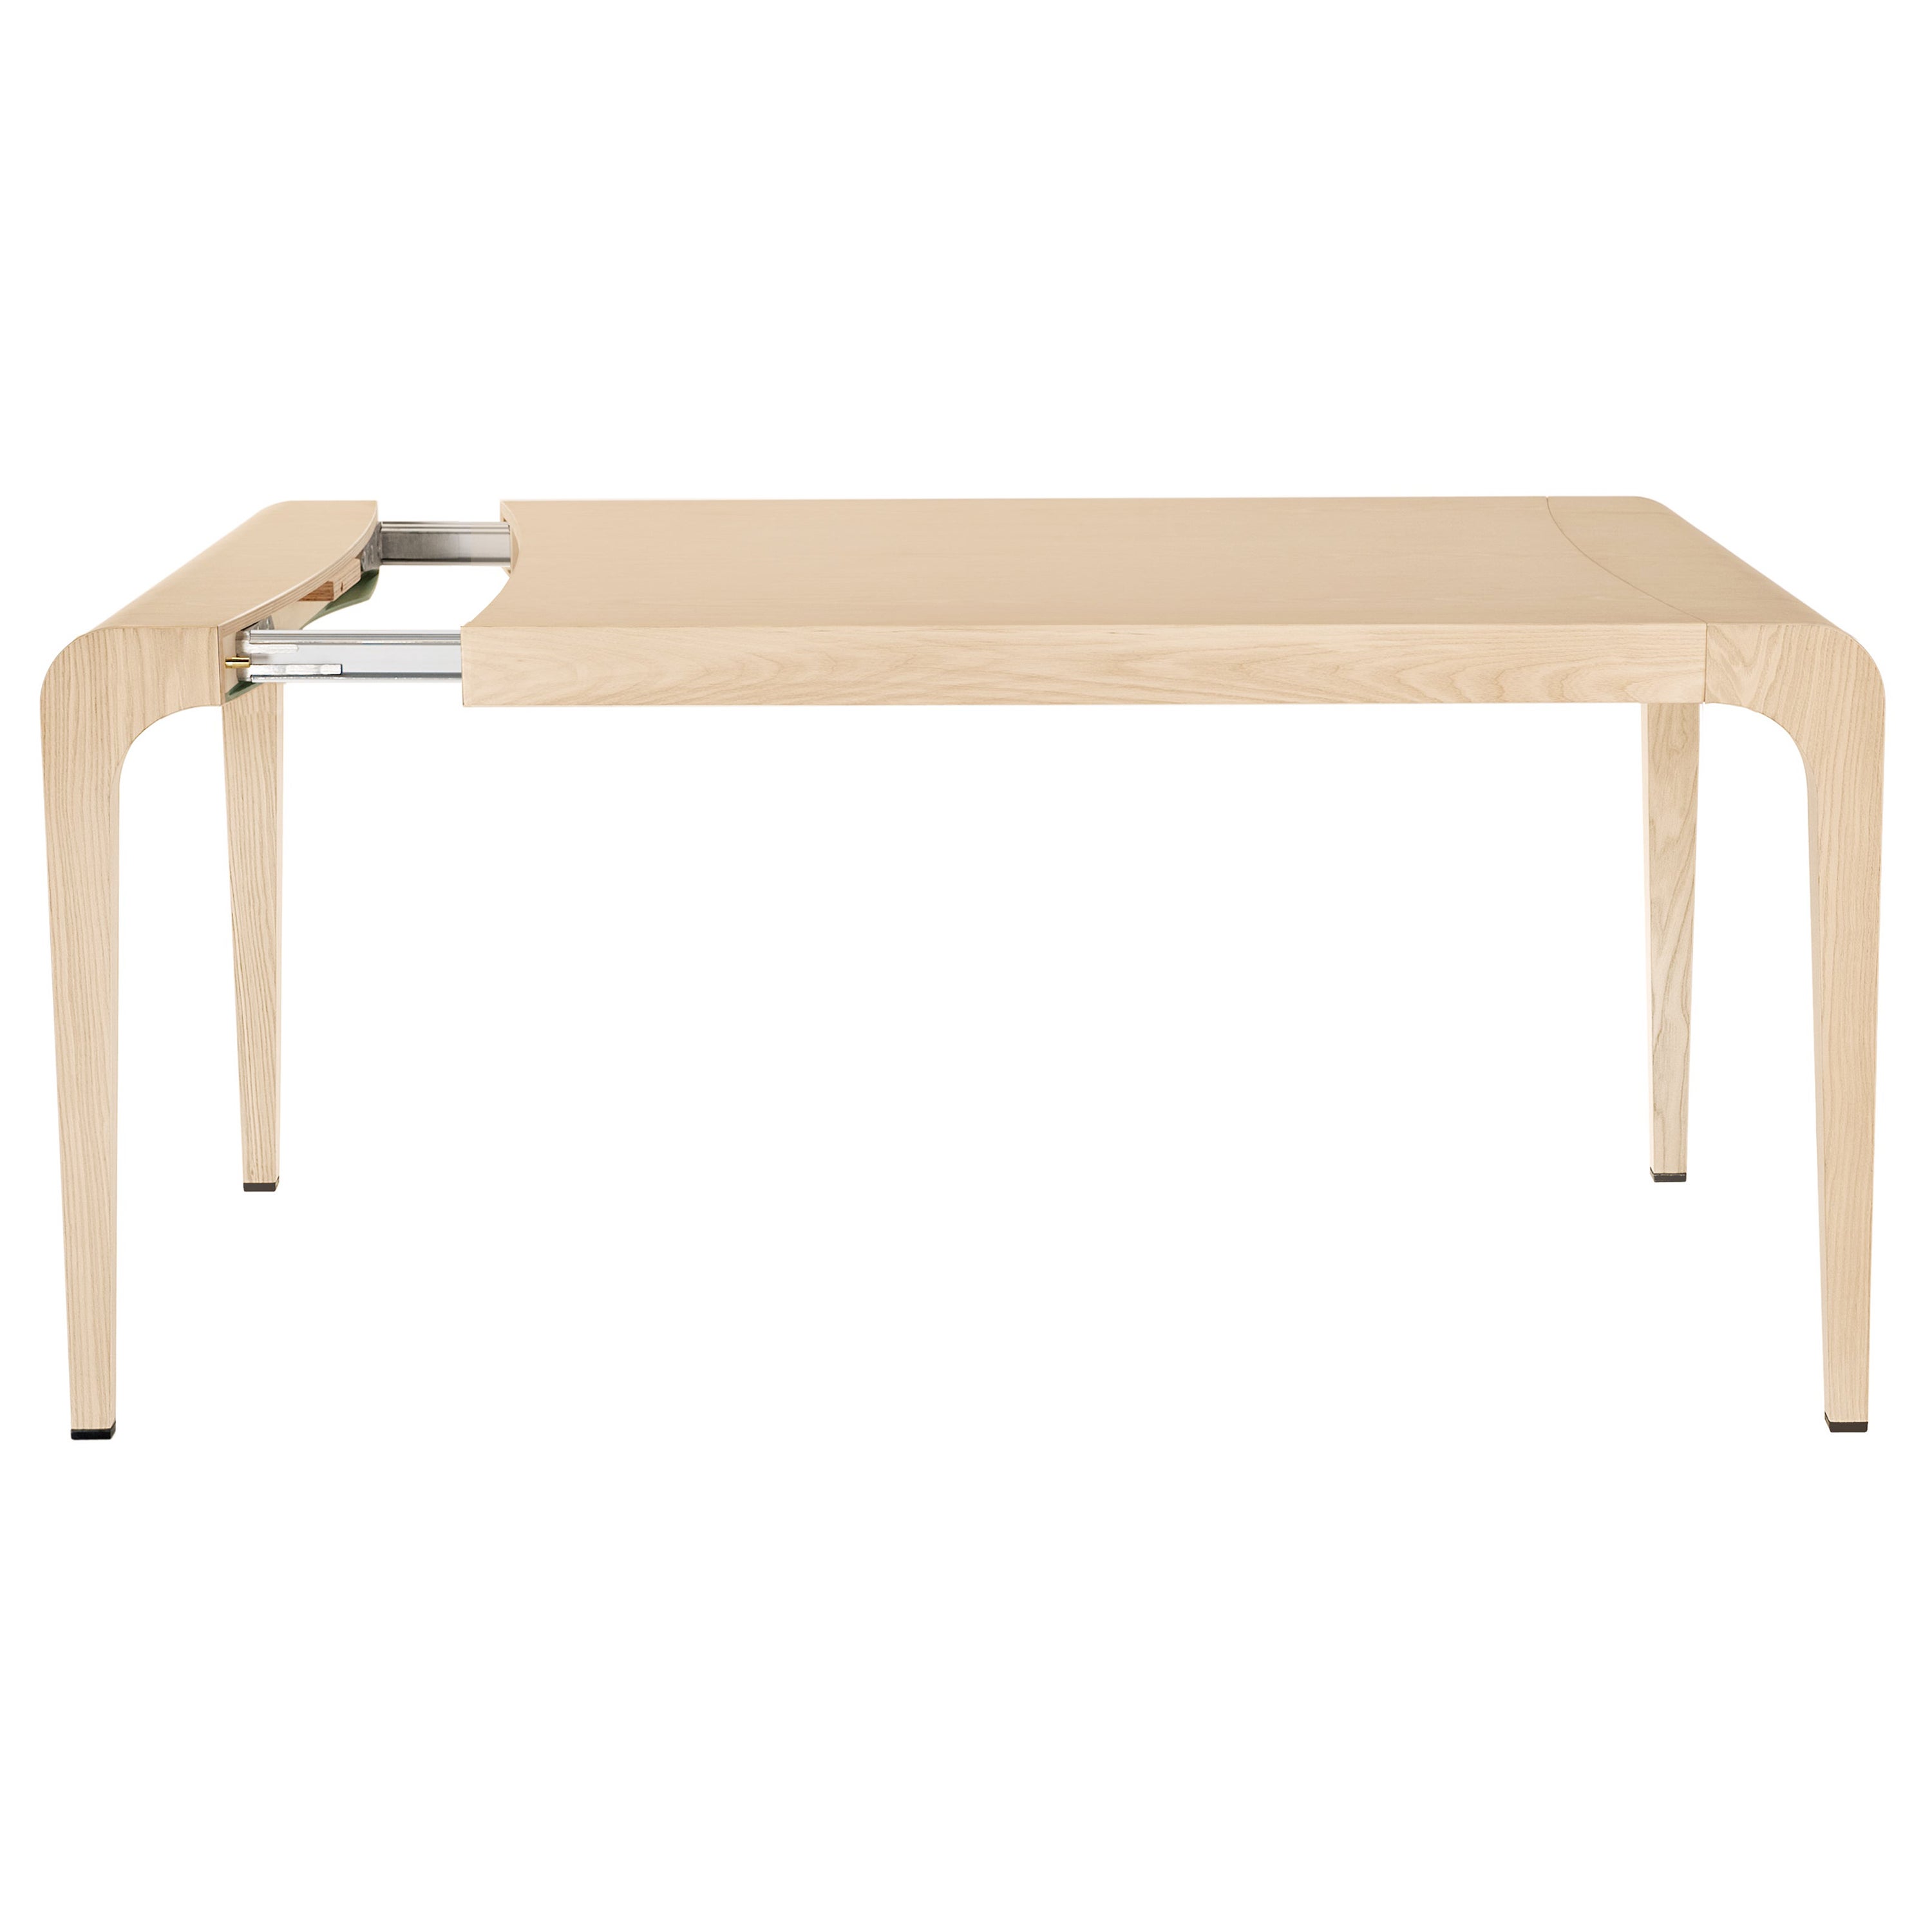 Alias Large 396 Ilvolo Extendable Table in Whitened Oak Top and Frame For Sale